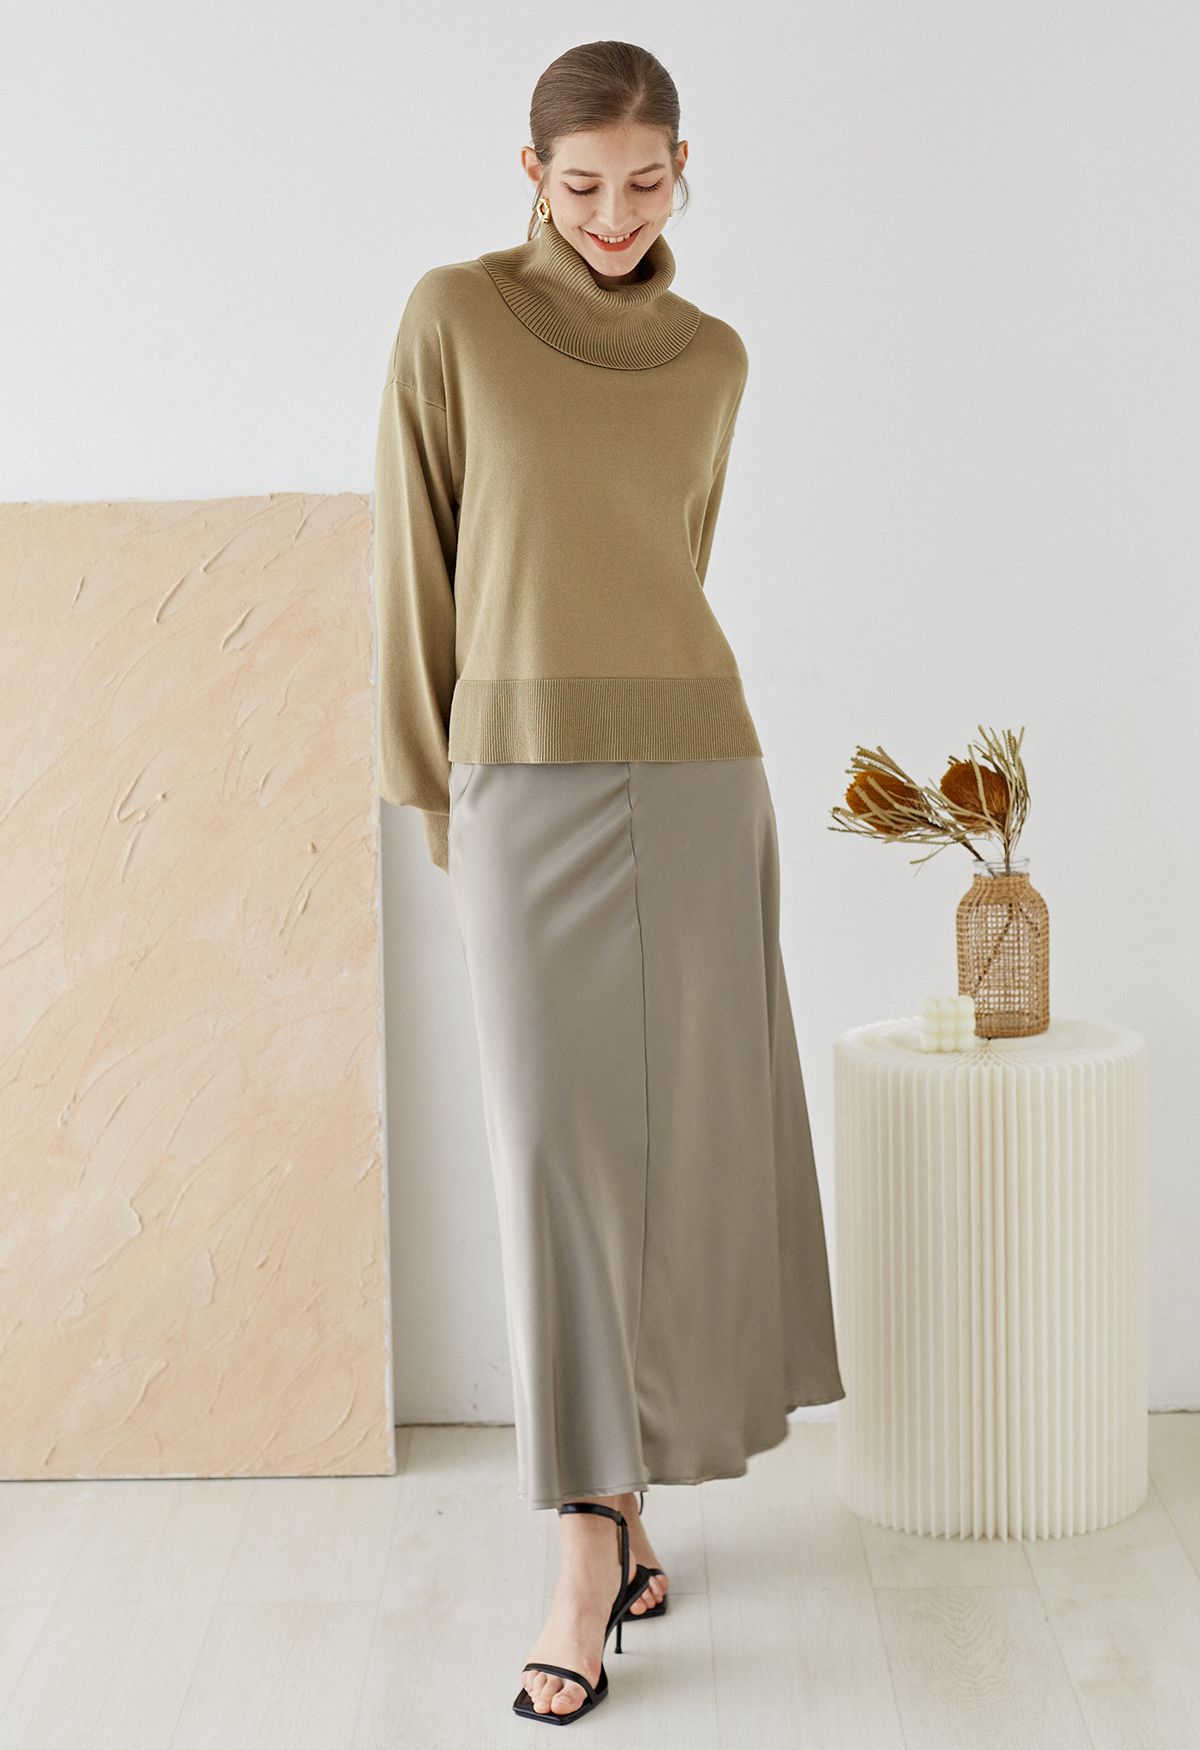 Middle Seam Smooth Satin Drape Maxi Skirt in Taupe